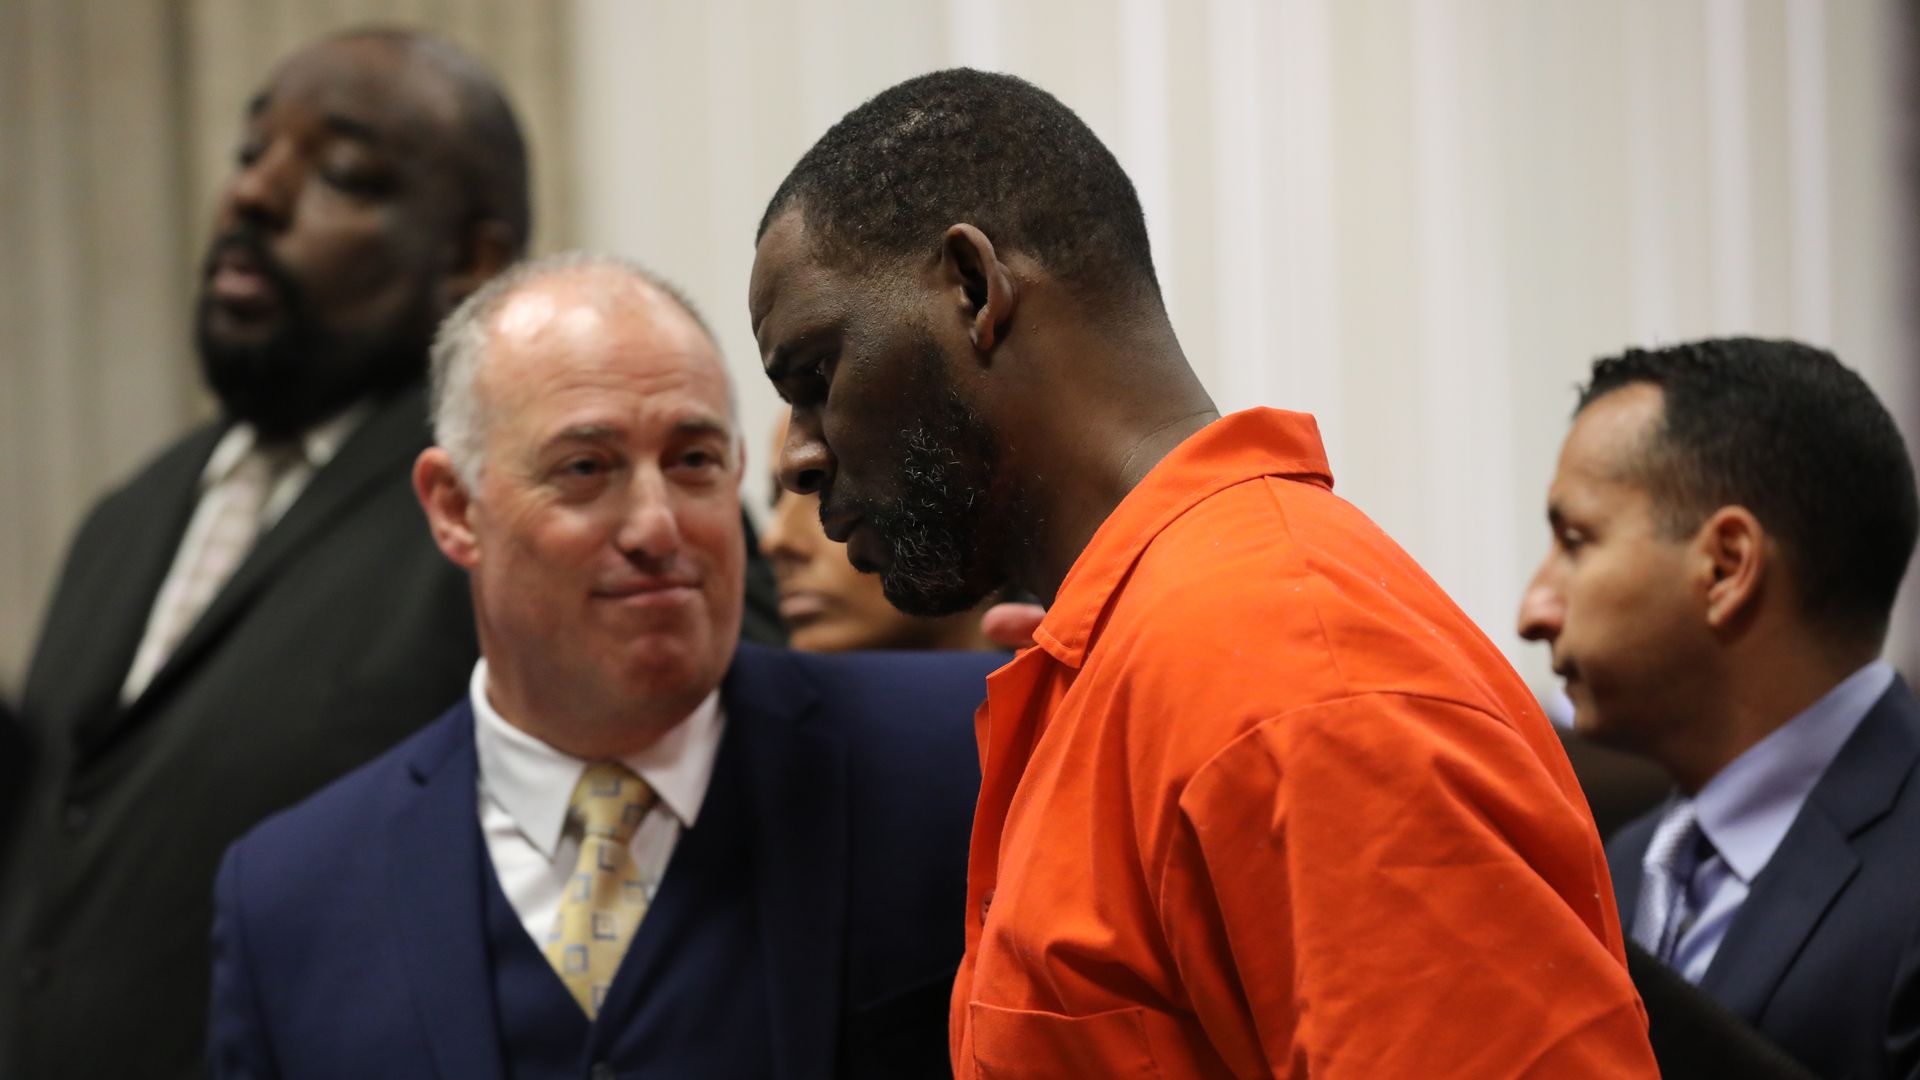 In this image, Kelly stands in an orange prison jumpsuit next to his lawyer, who wears a suit and tie.